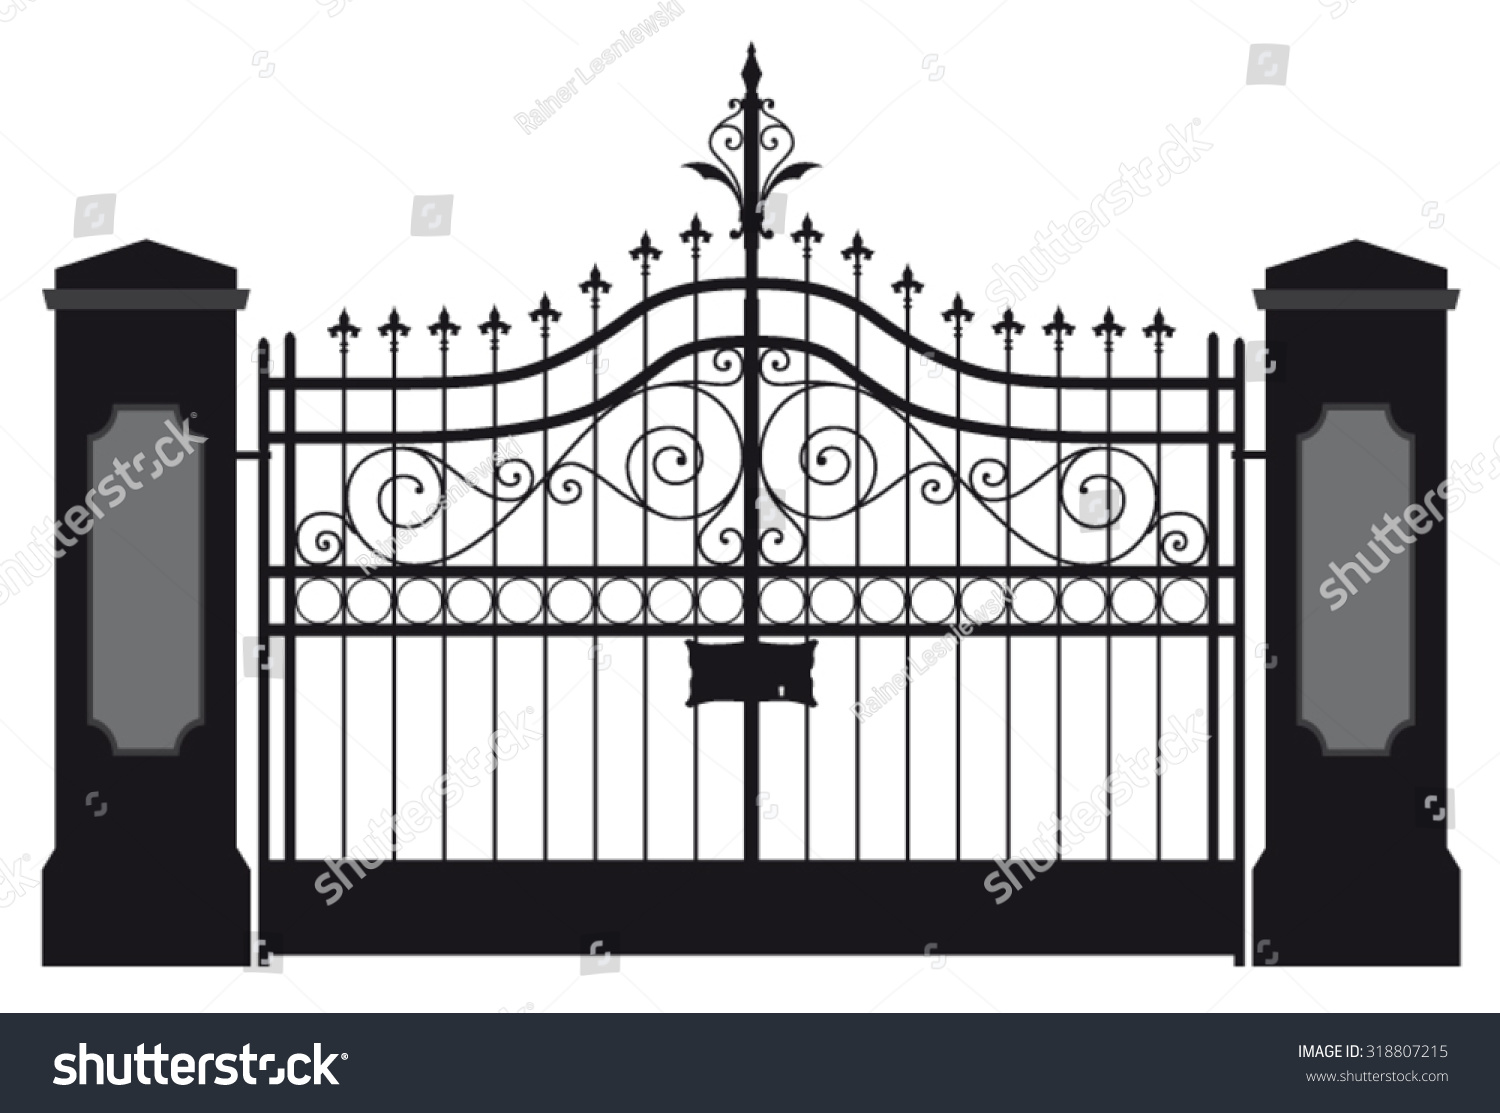 clipart gate fence - photo #40